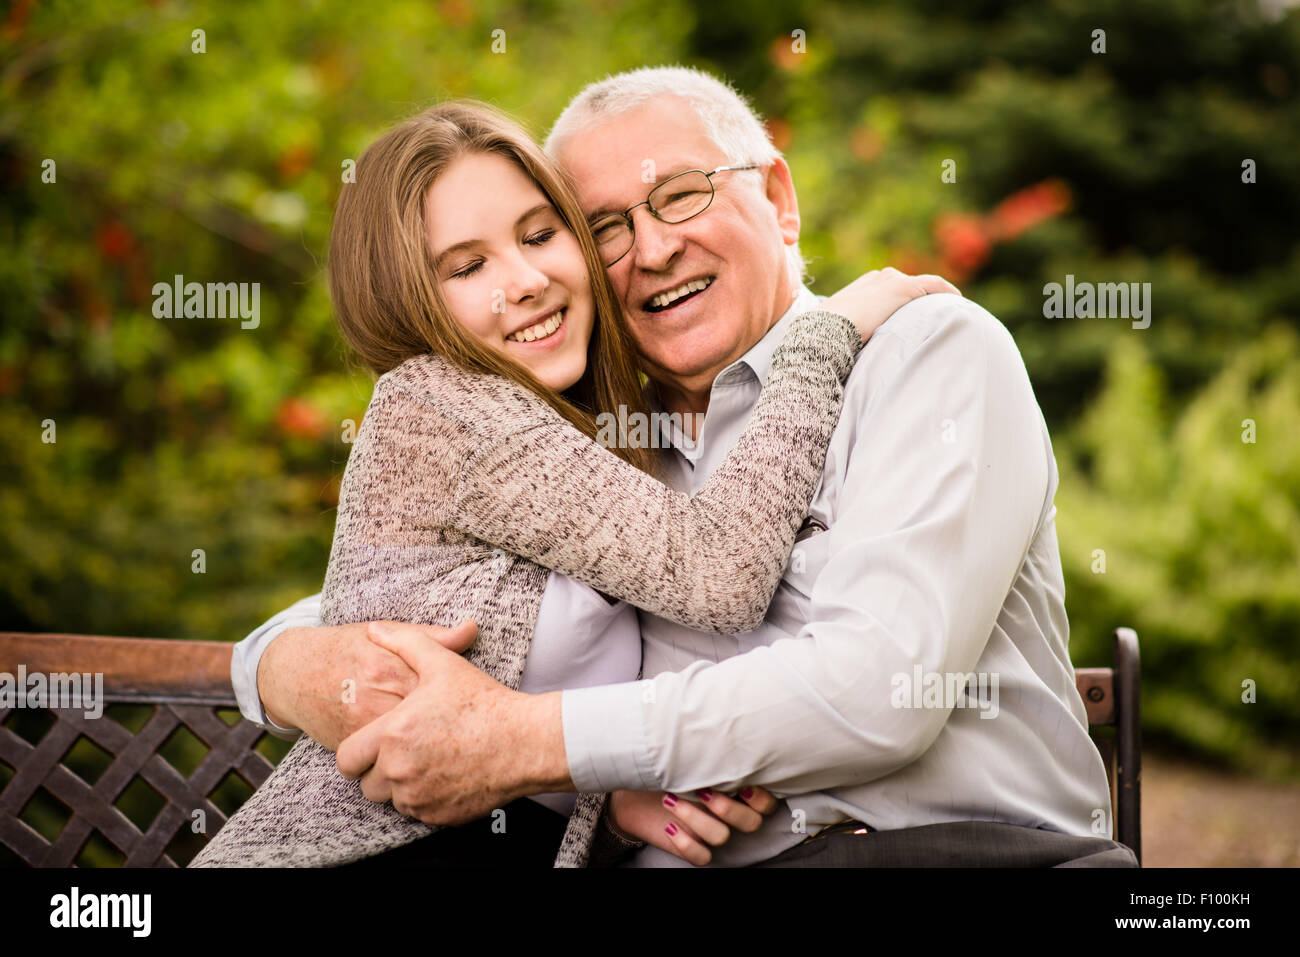 Authentic photo of smiling grandfather hugging with his teenage granddaughter outdoor in nature Stock Photo